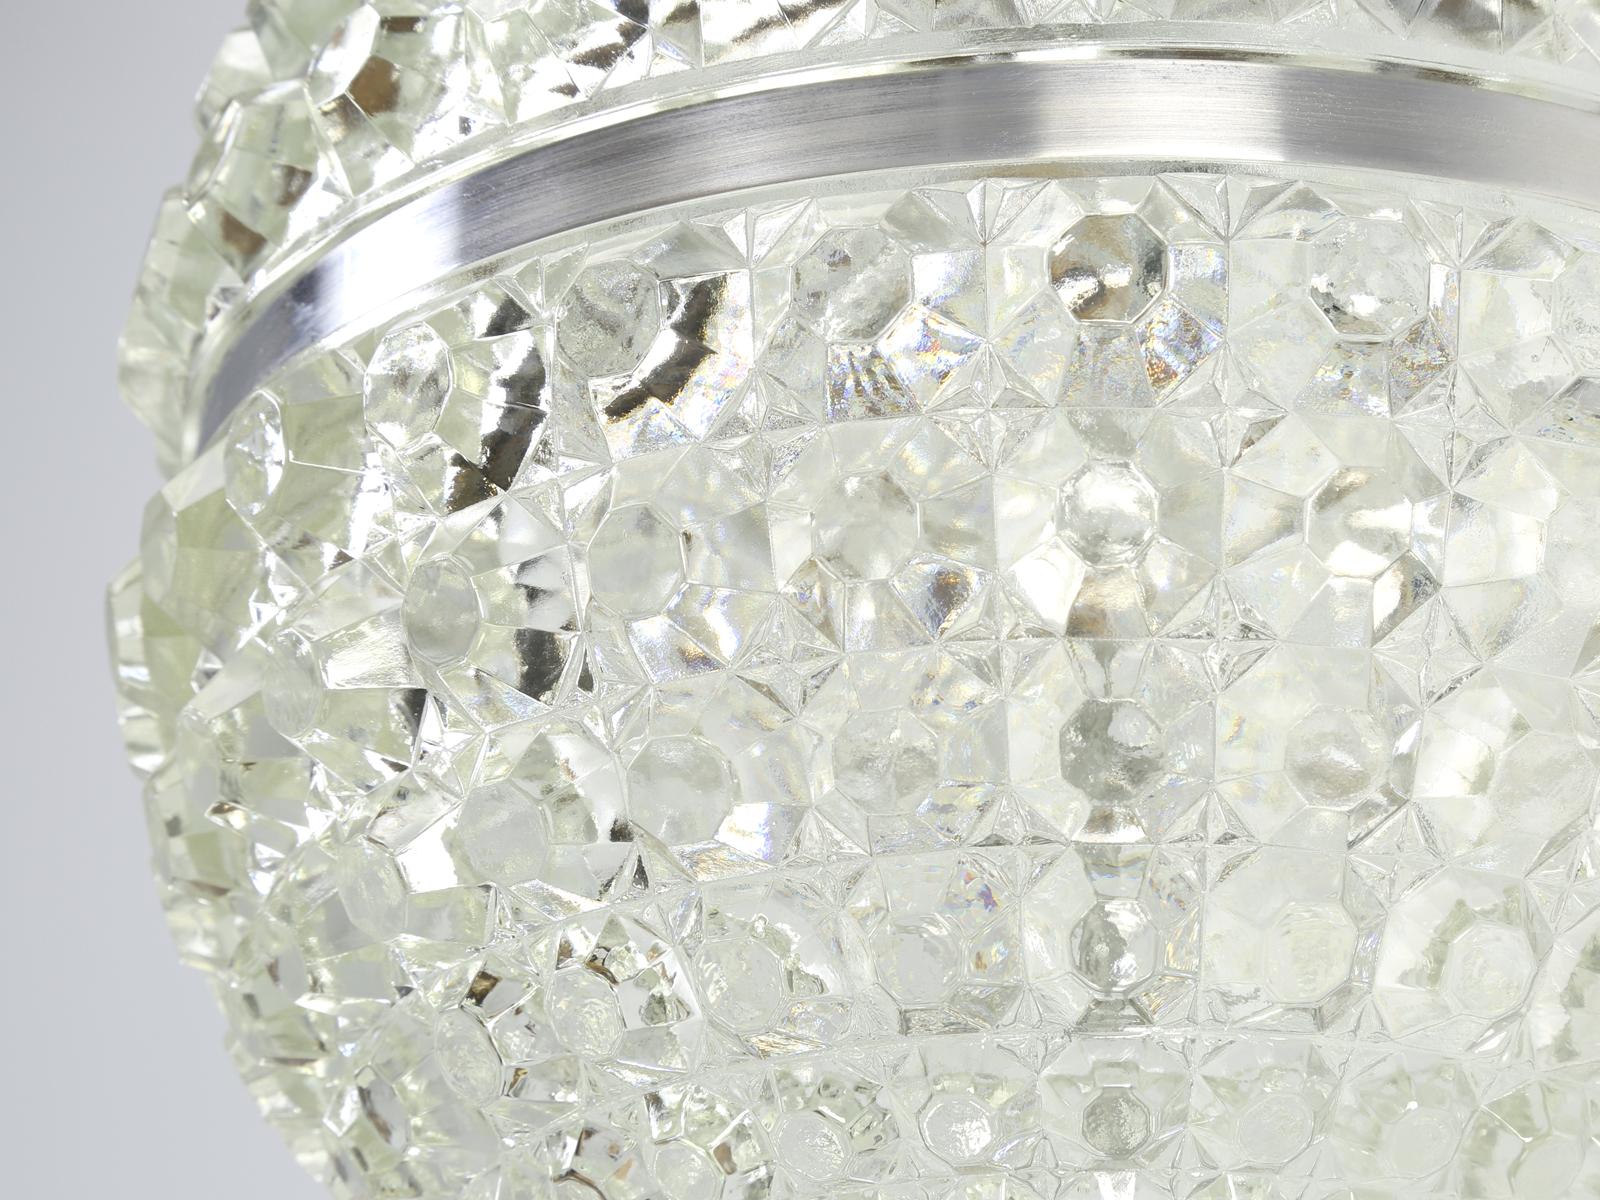 Mid-Century Modern Crystal Orb Pendant Fixture from Argentina For Sale 2